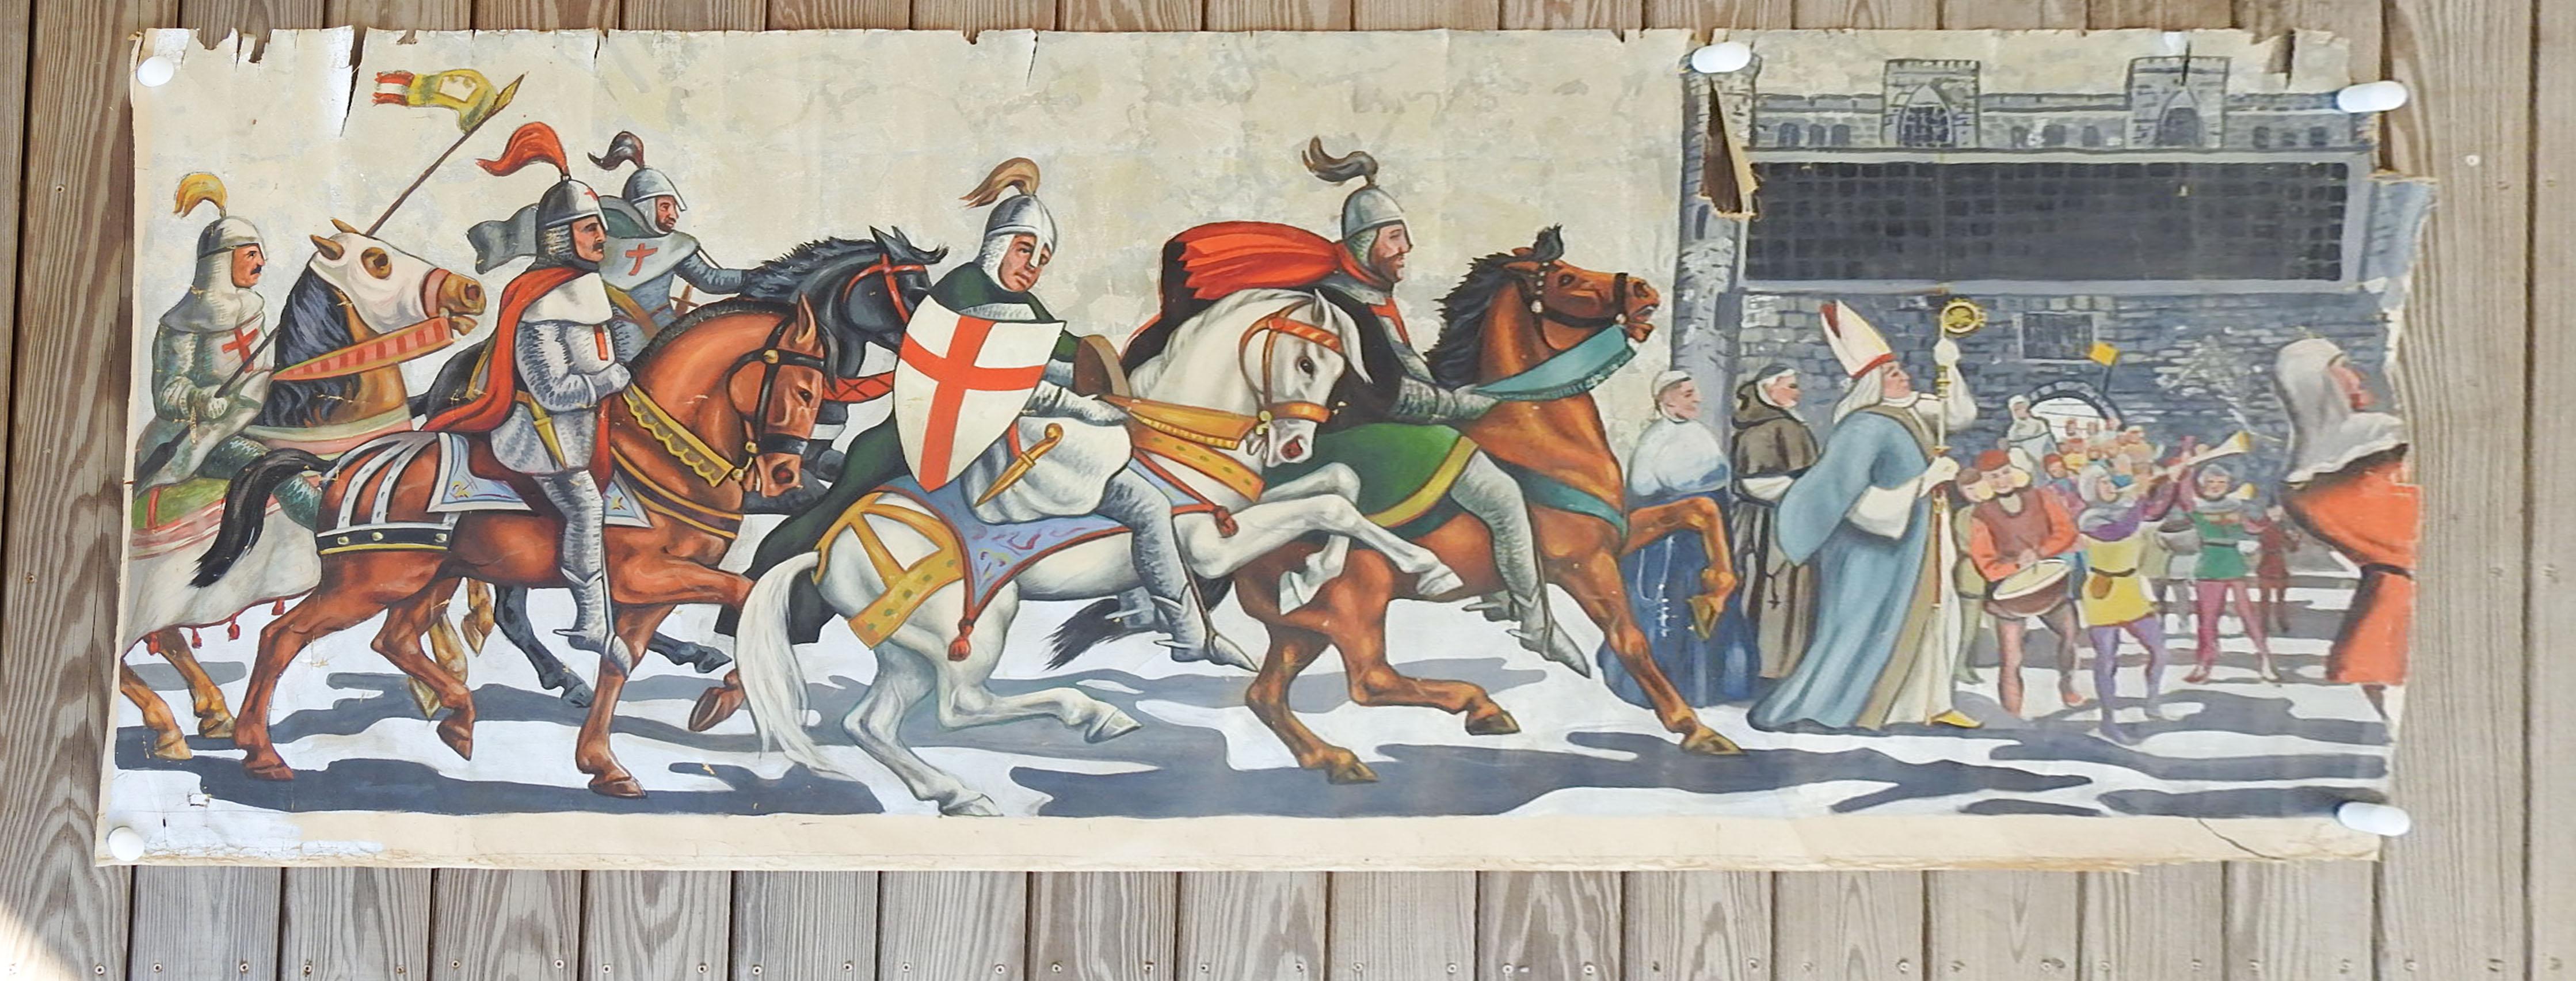 Vintage oil on canvas painting of a procession of knights on horseback by Geneva Flores Hart Fell (1906 - 2008) Texas.  Colorful painting with metallic silver background on flat canvas.  Likely for interior wall decoration or mural sample. 